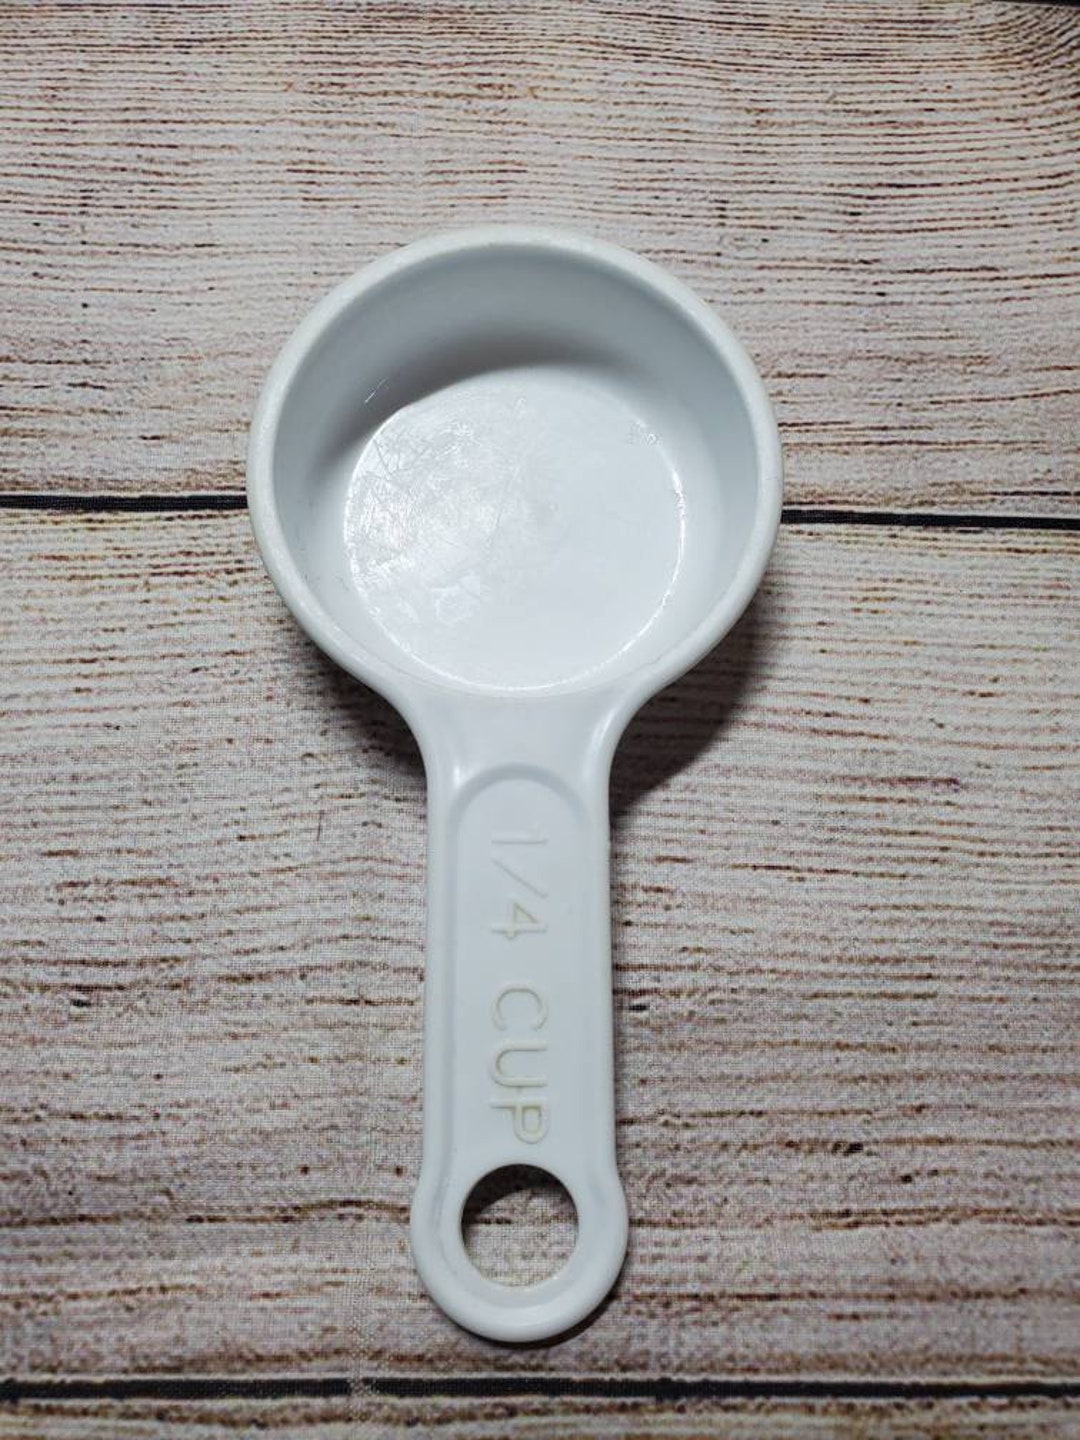 Vintage Rubbermaid 1/4-cup Measuring Cup WHITE, 8315-17, Baking